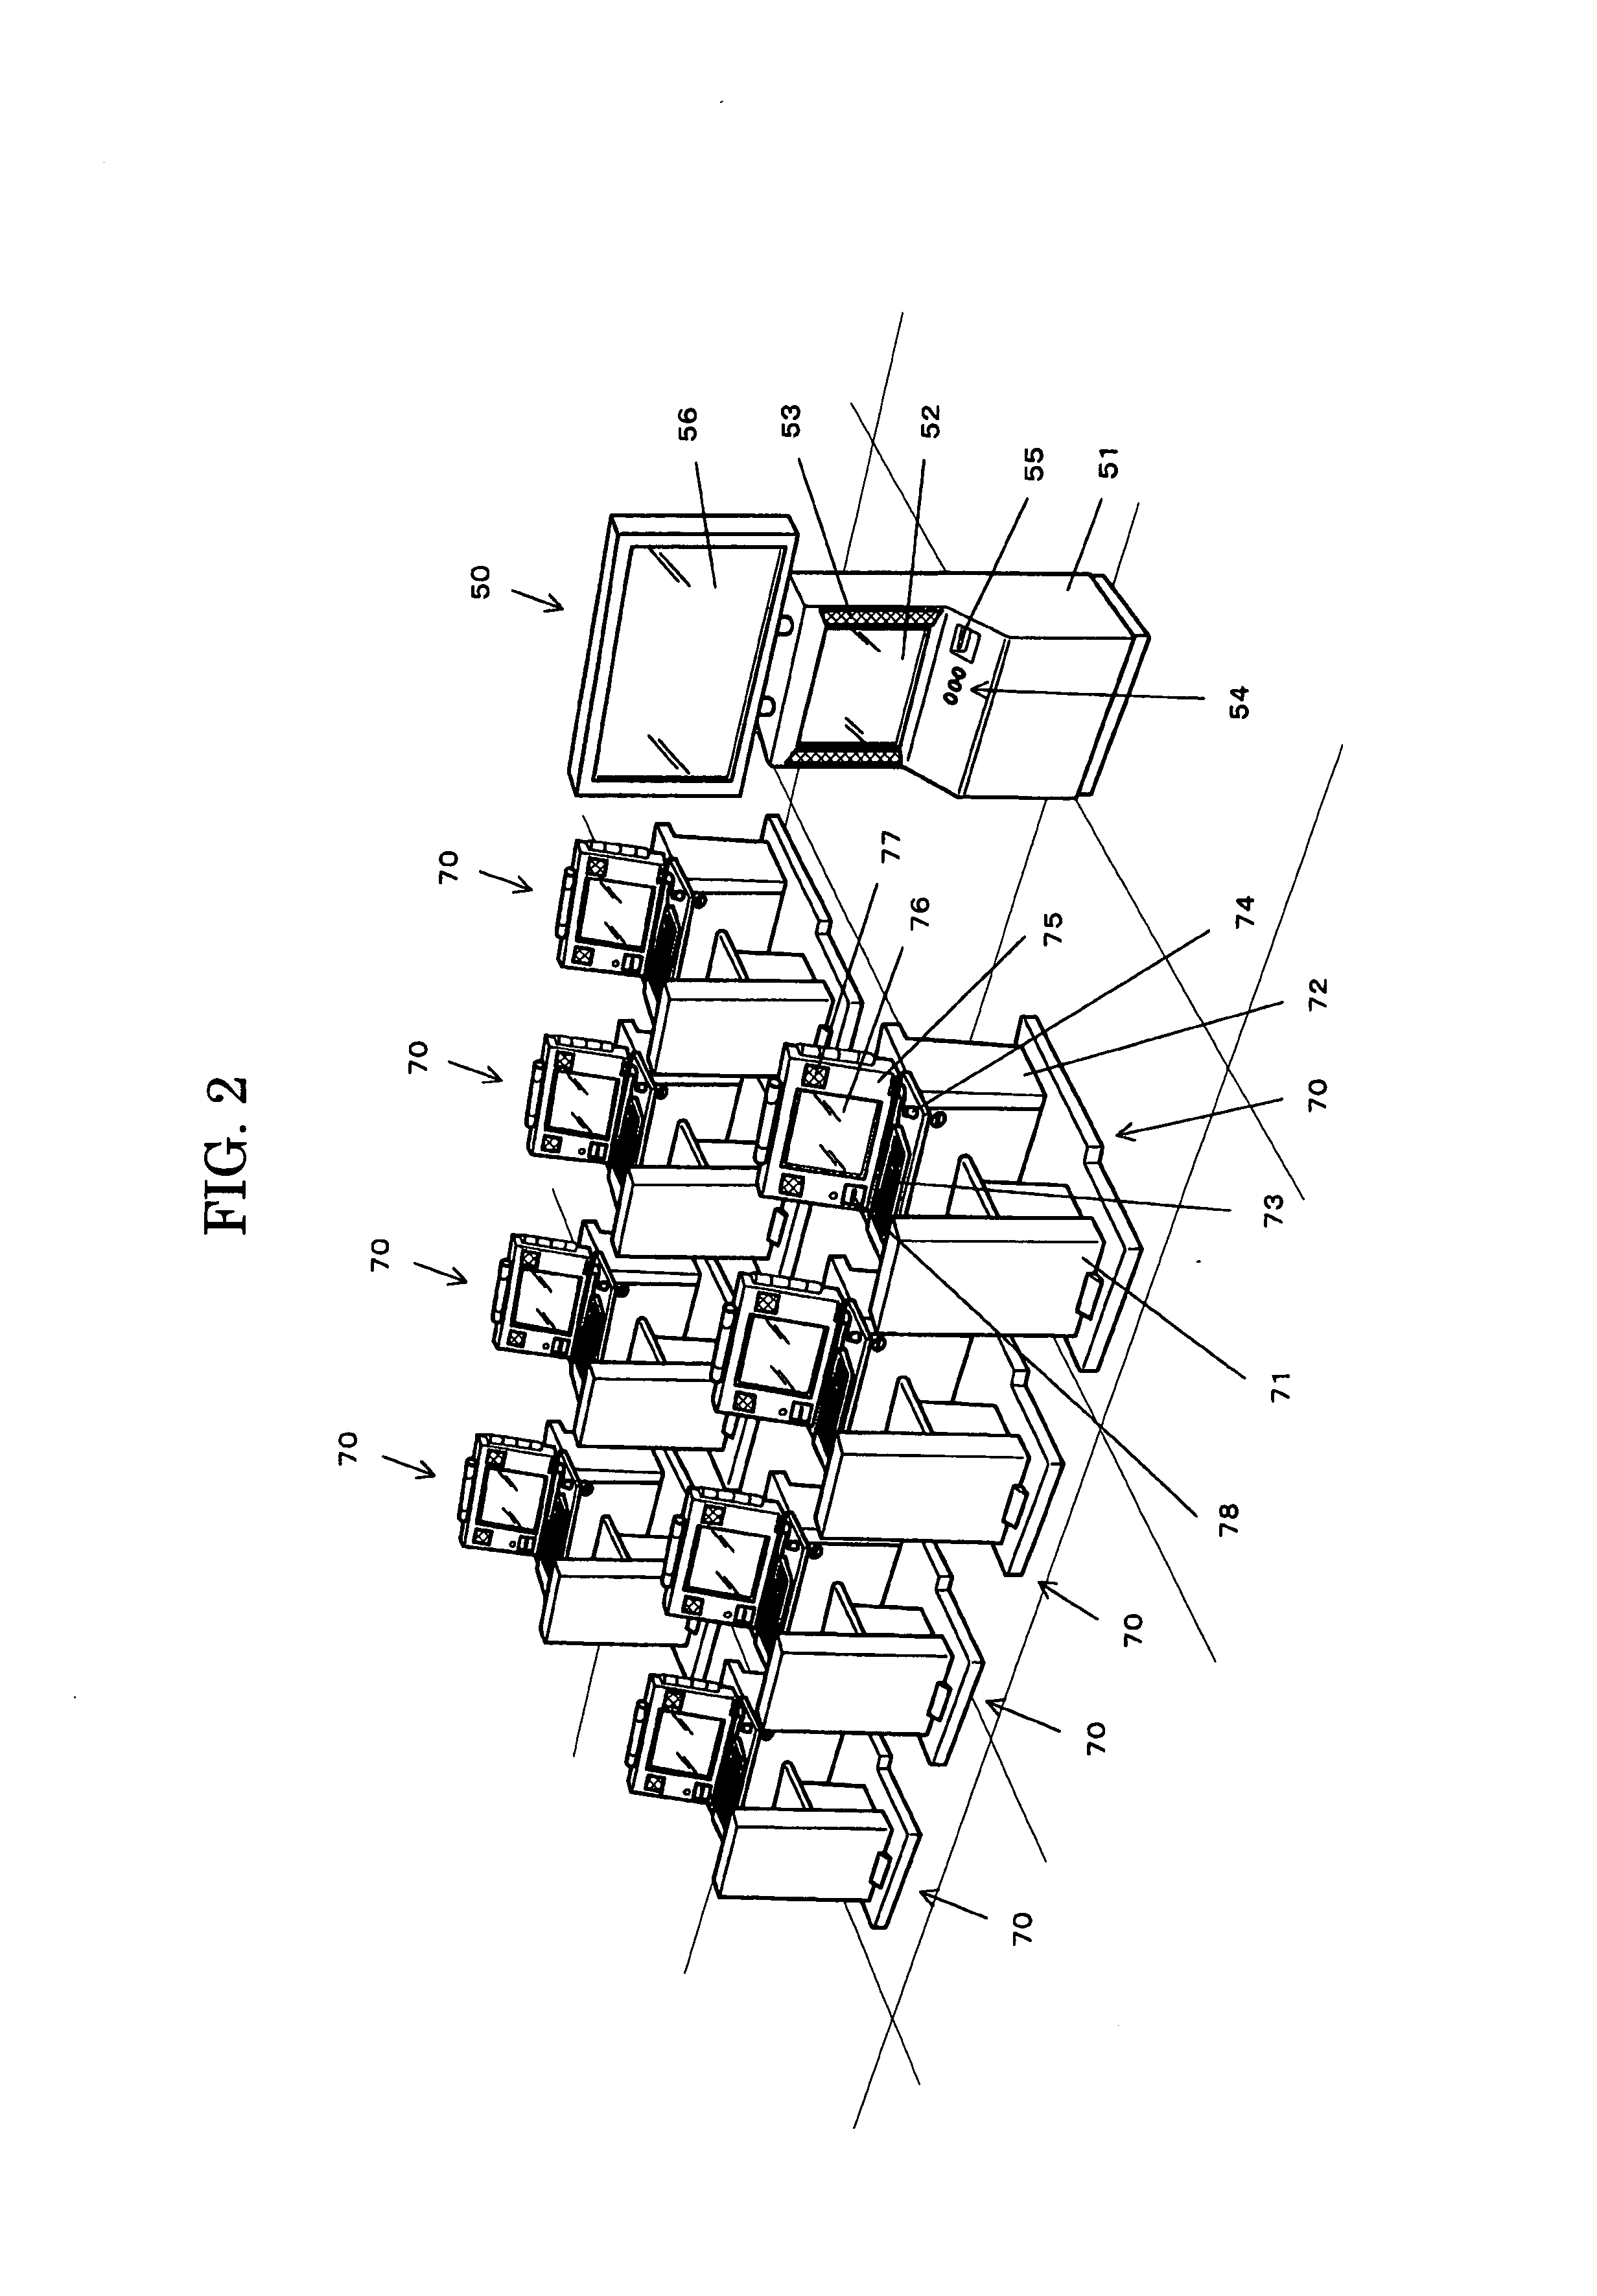 Server system, schedule management device and method